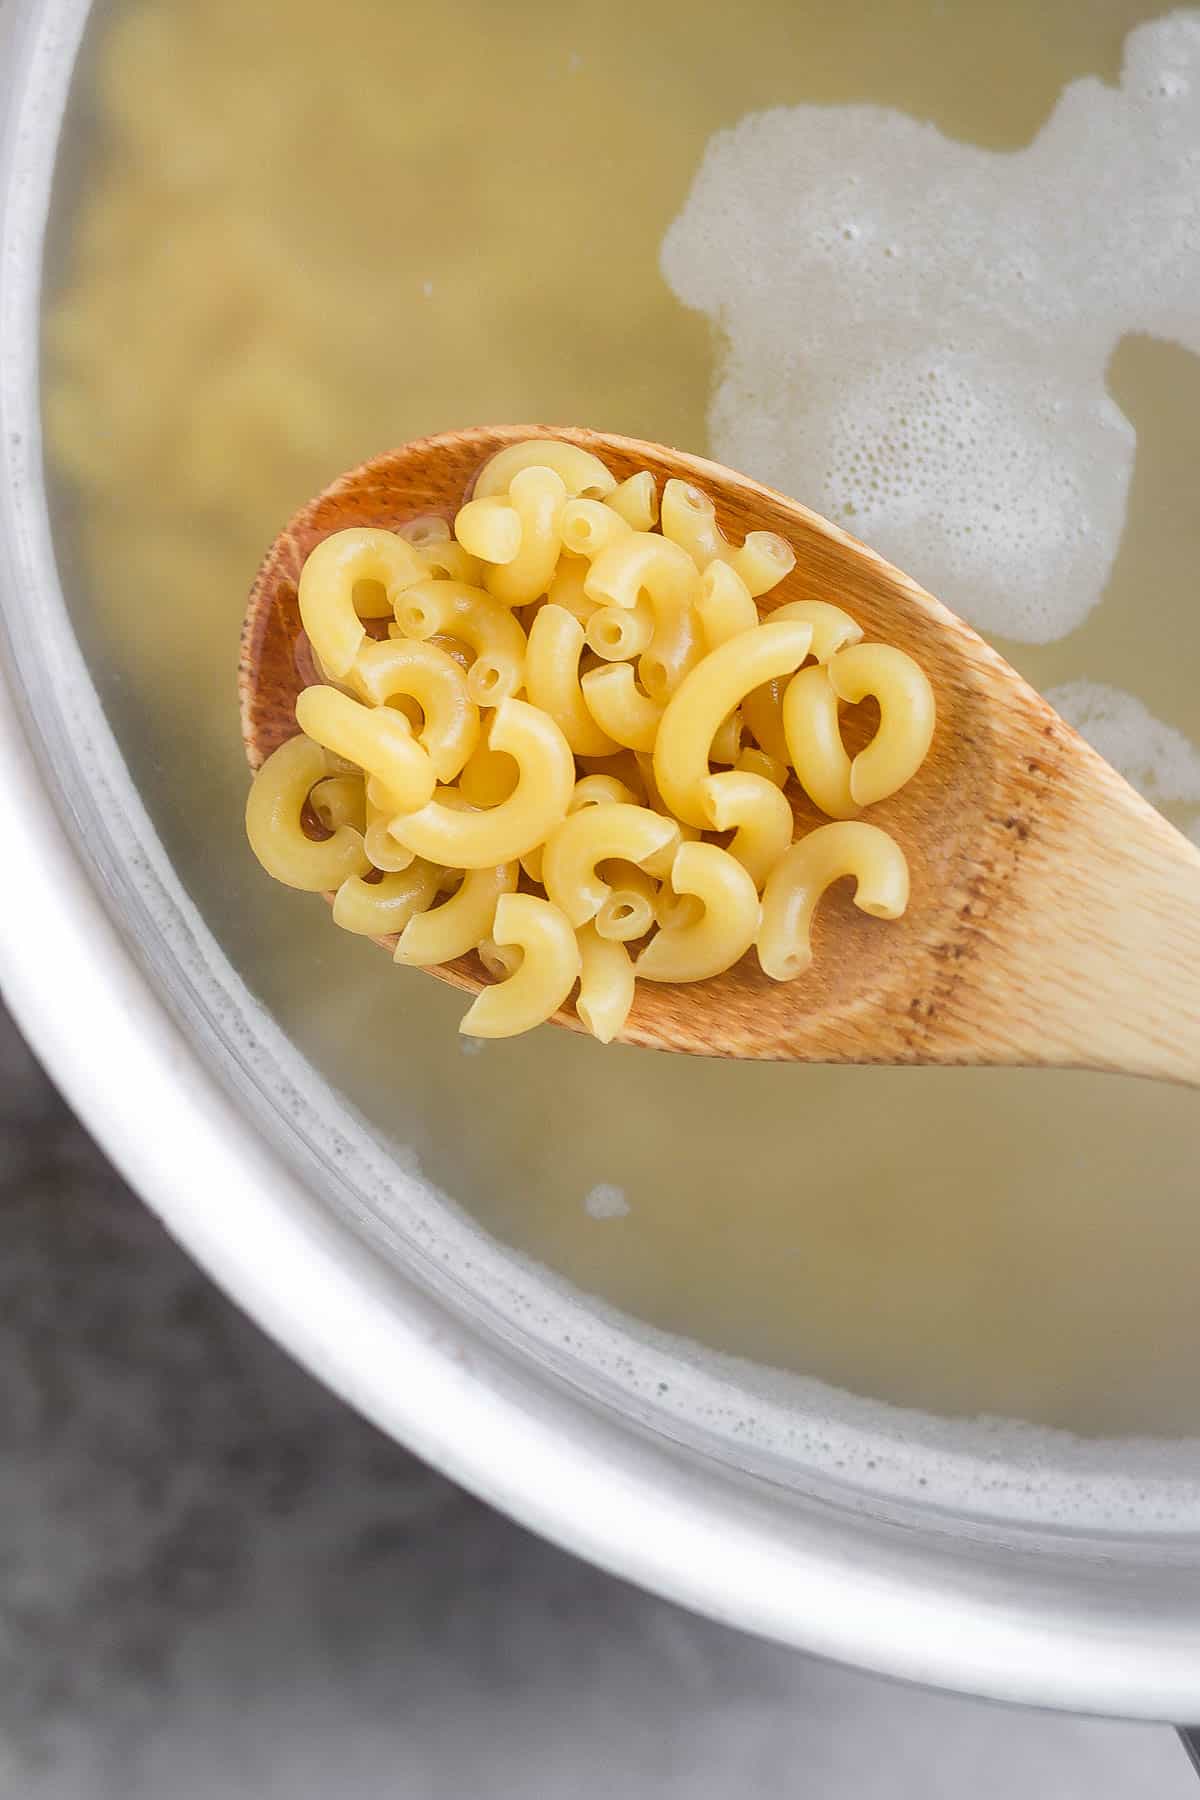 Macaroni noodles being boiled in a pot and a spoon scooping some out.